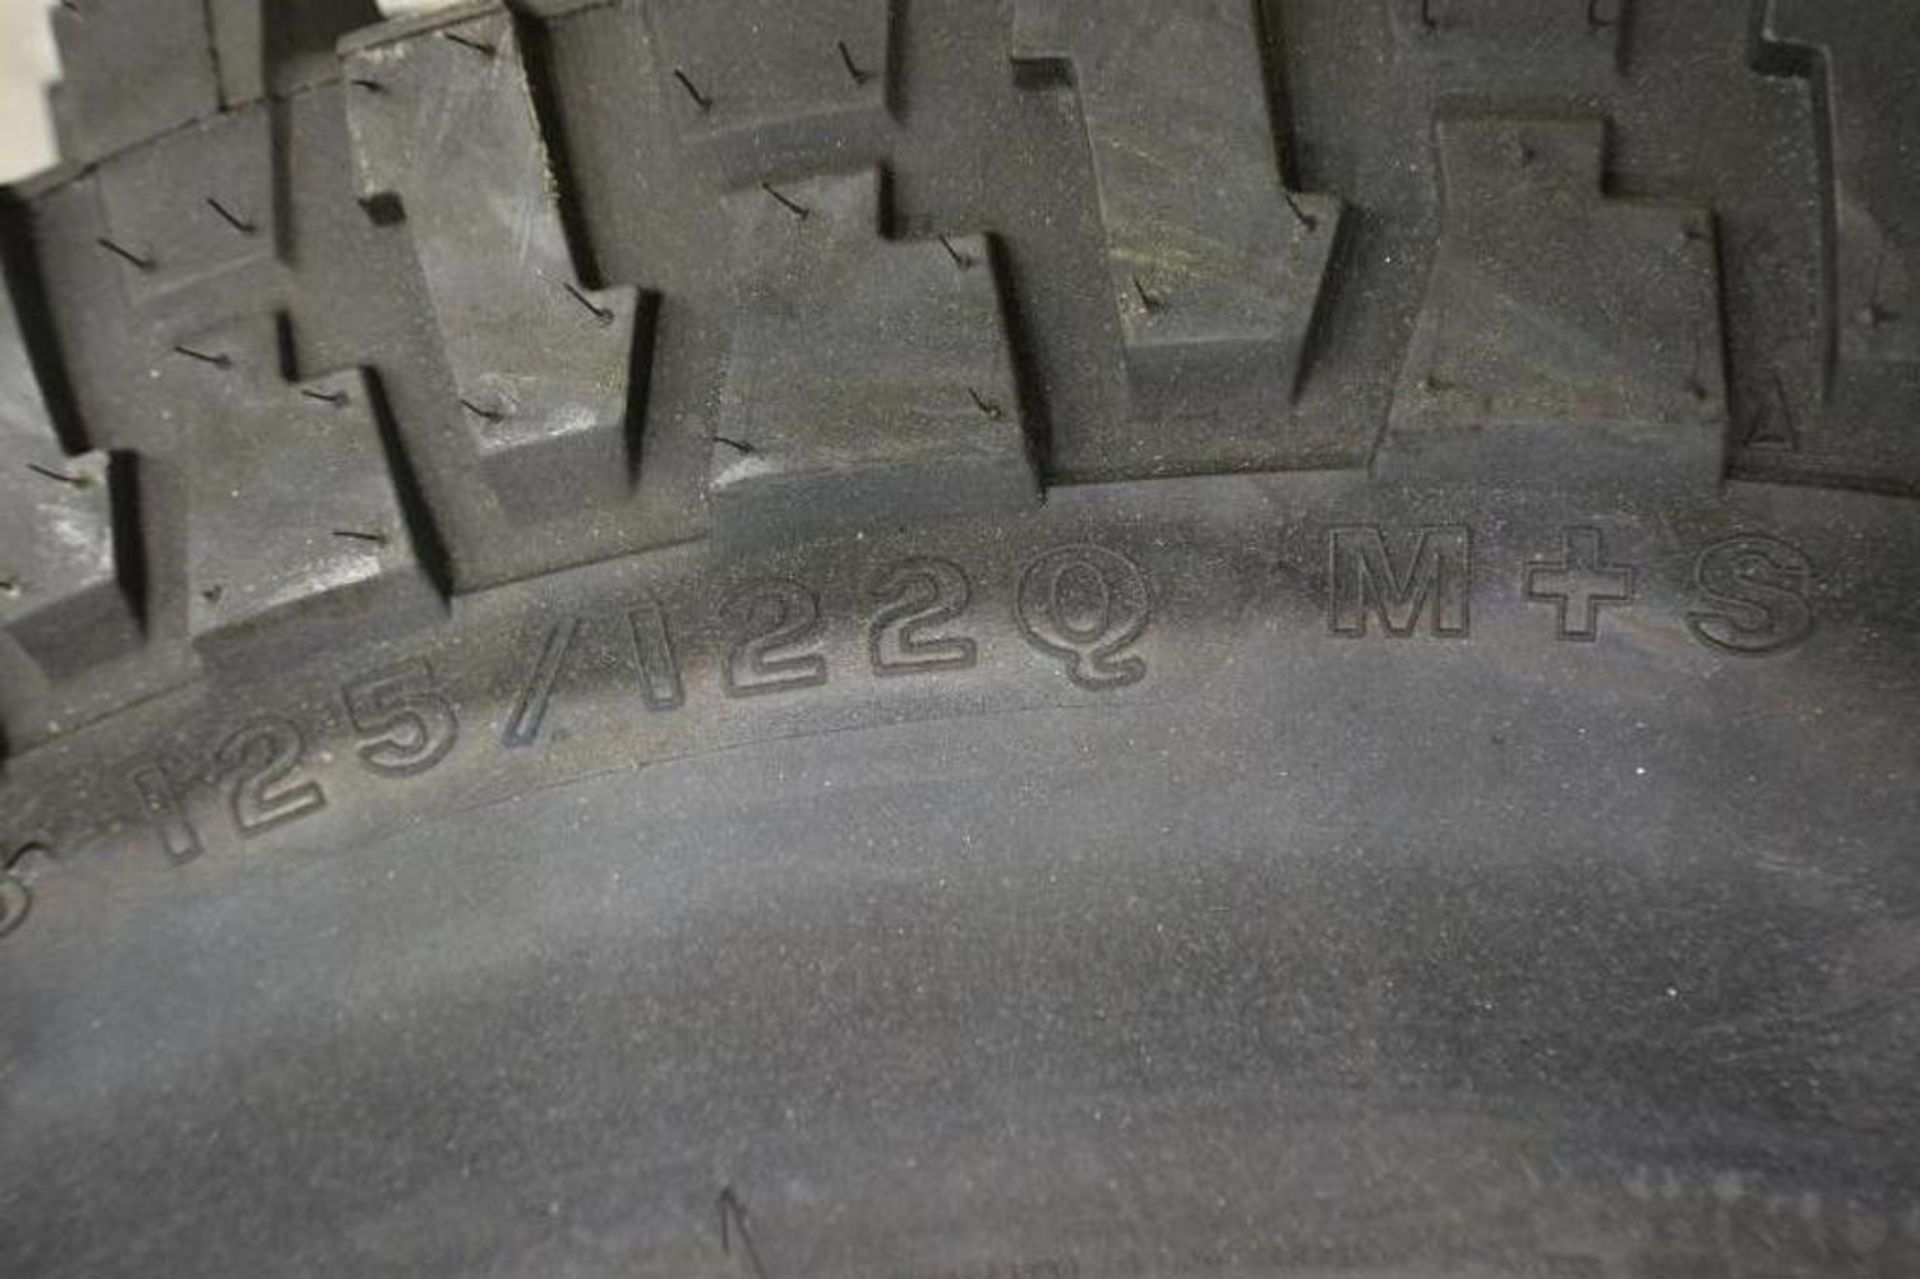 Tires. Set of 2 Tires LT 275 70R18 M + S by Firestone - Image 5 of 5